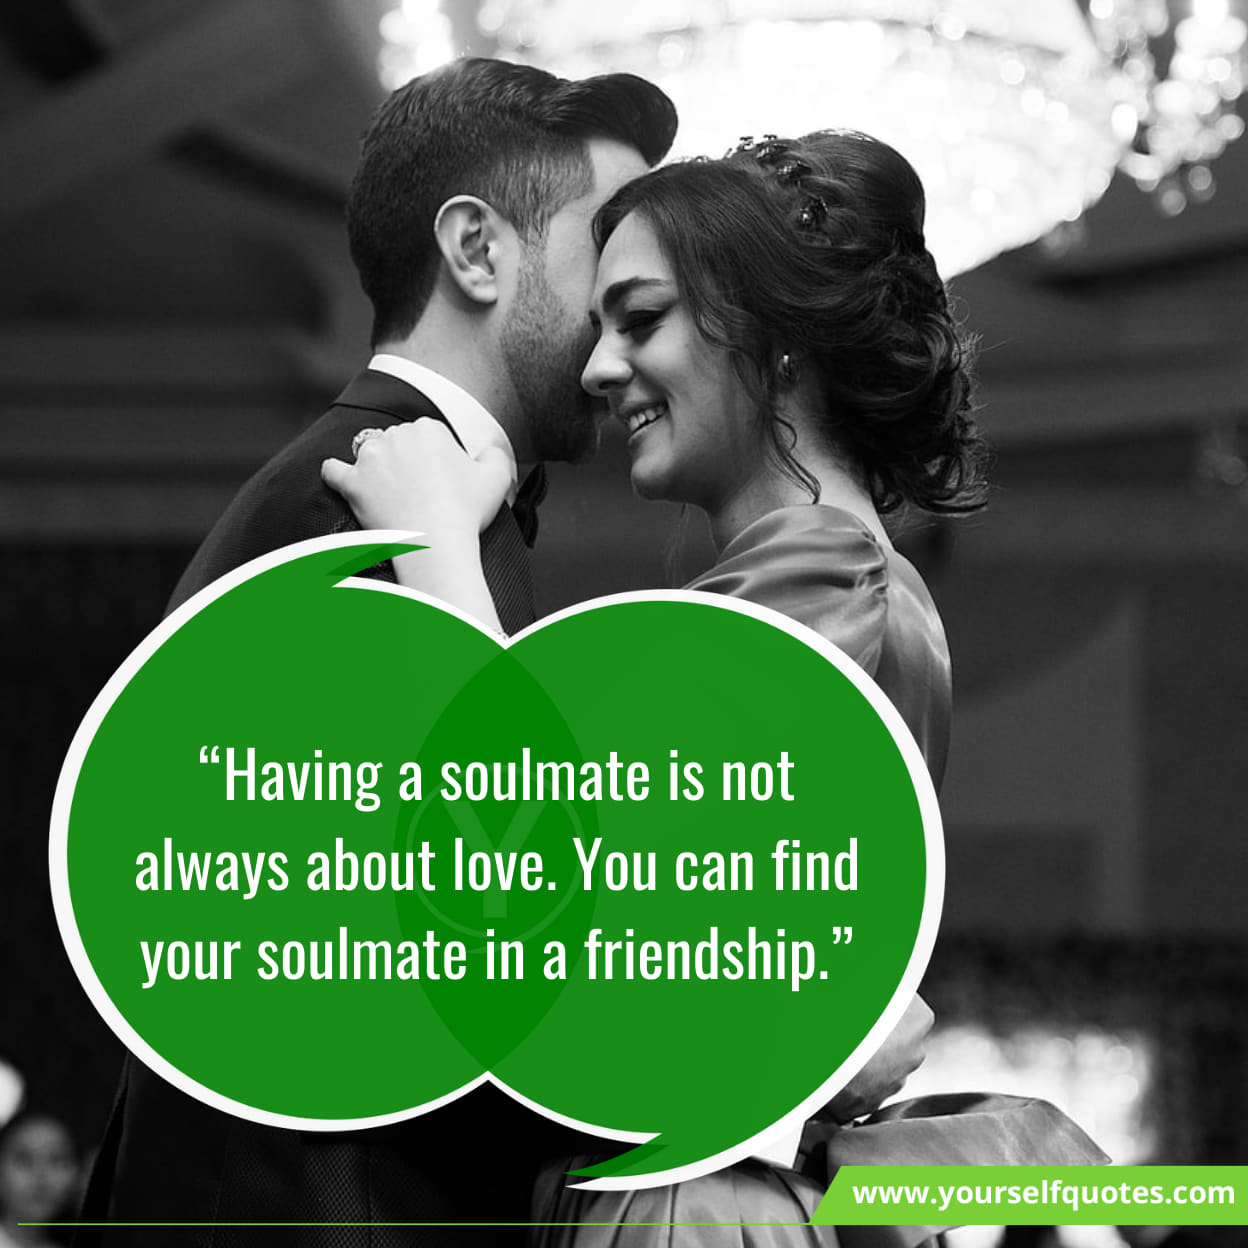 Soulmate Quotes for Friends